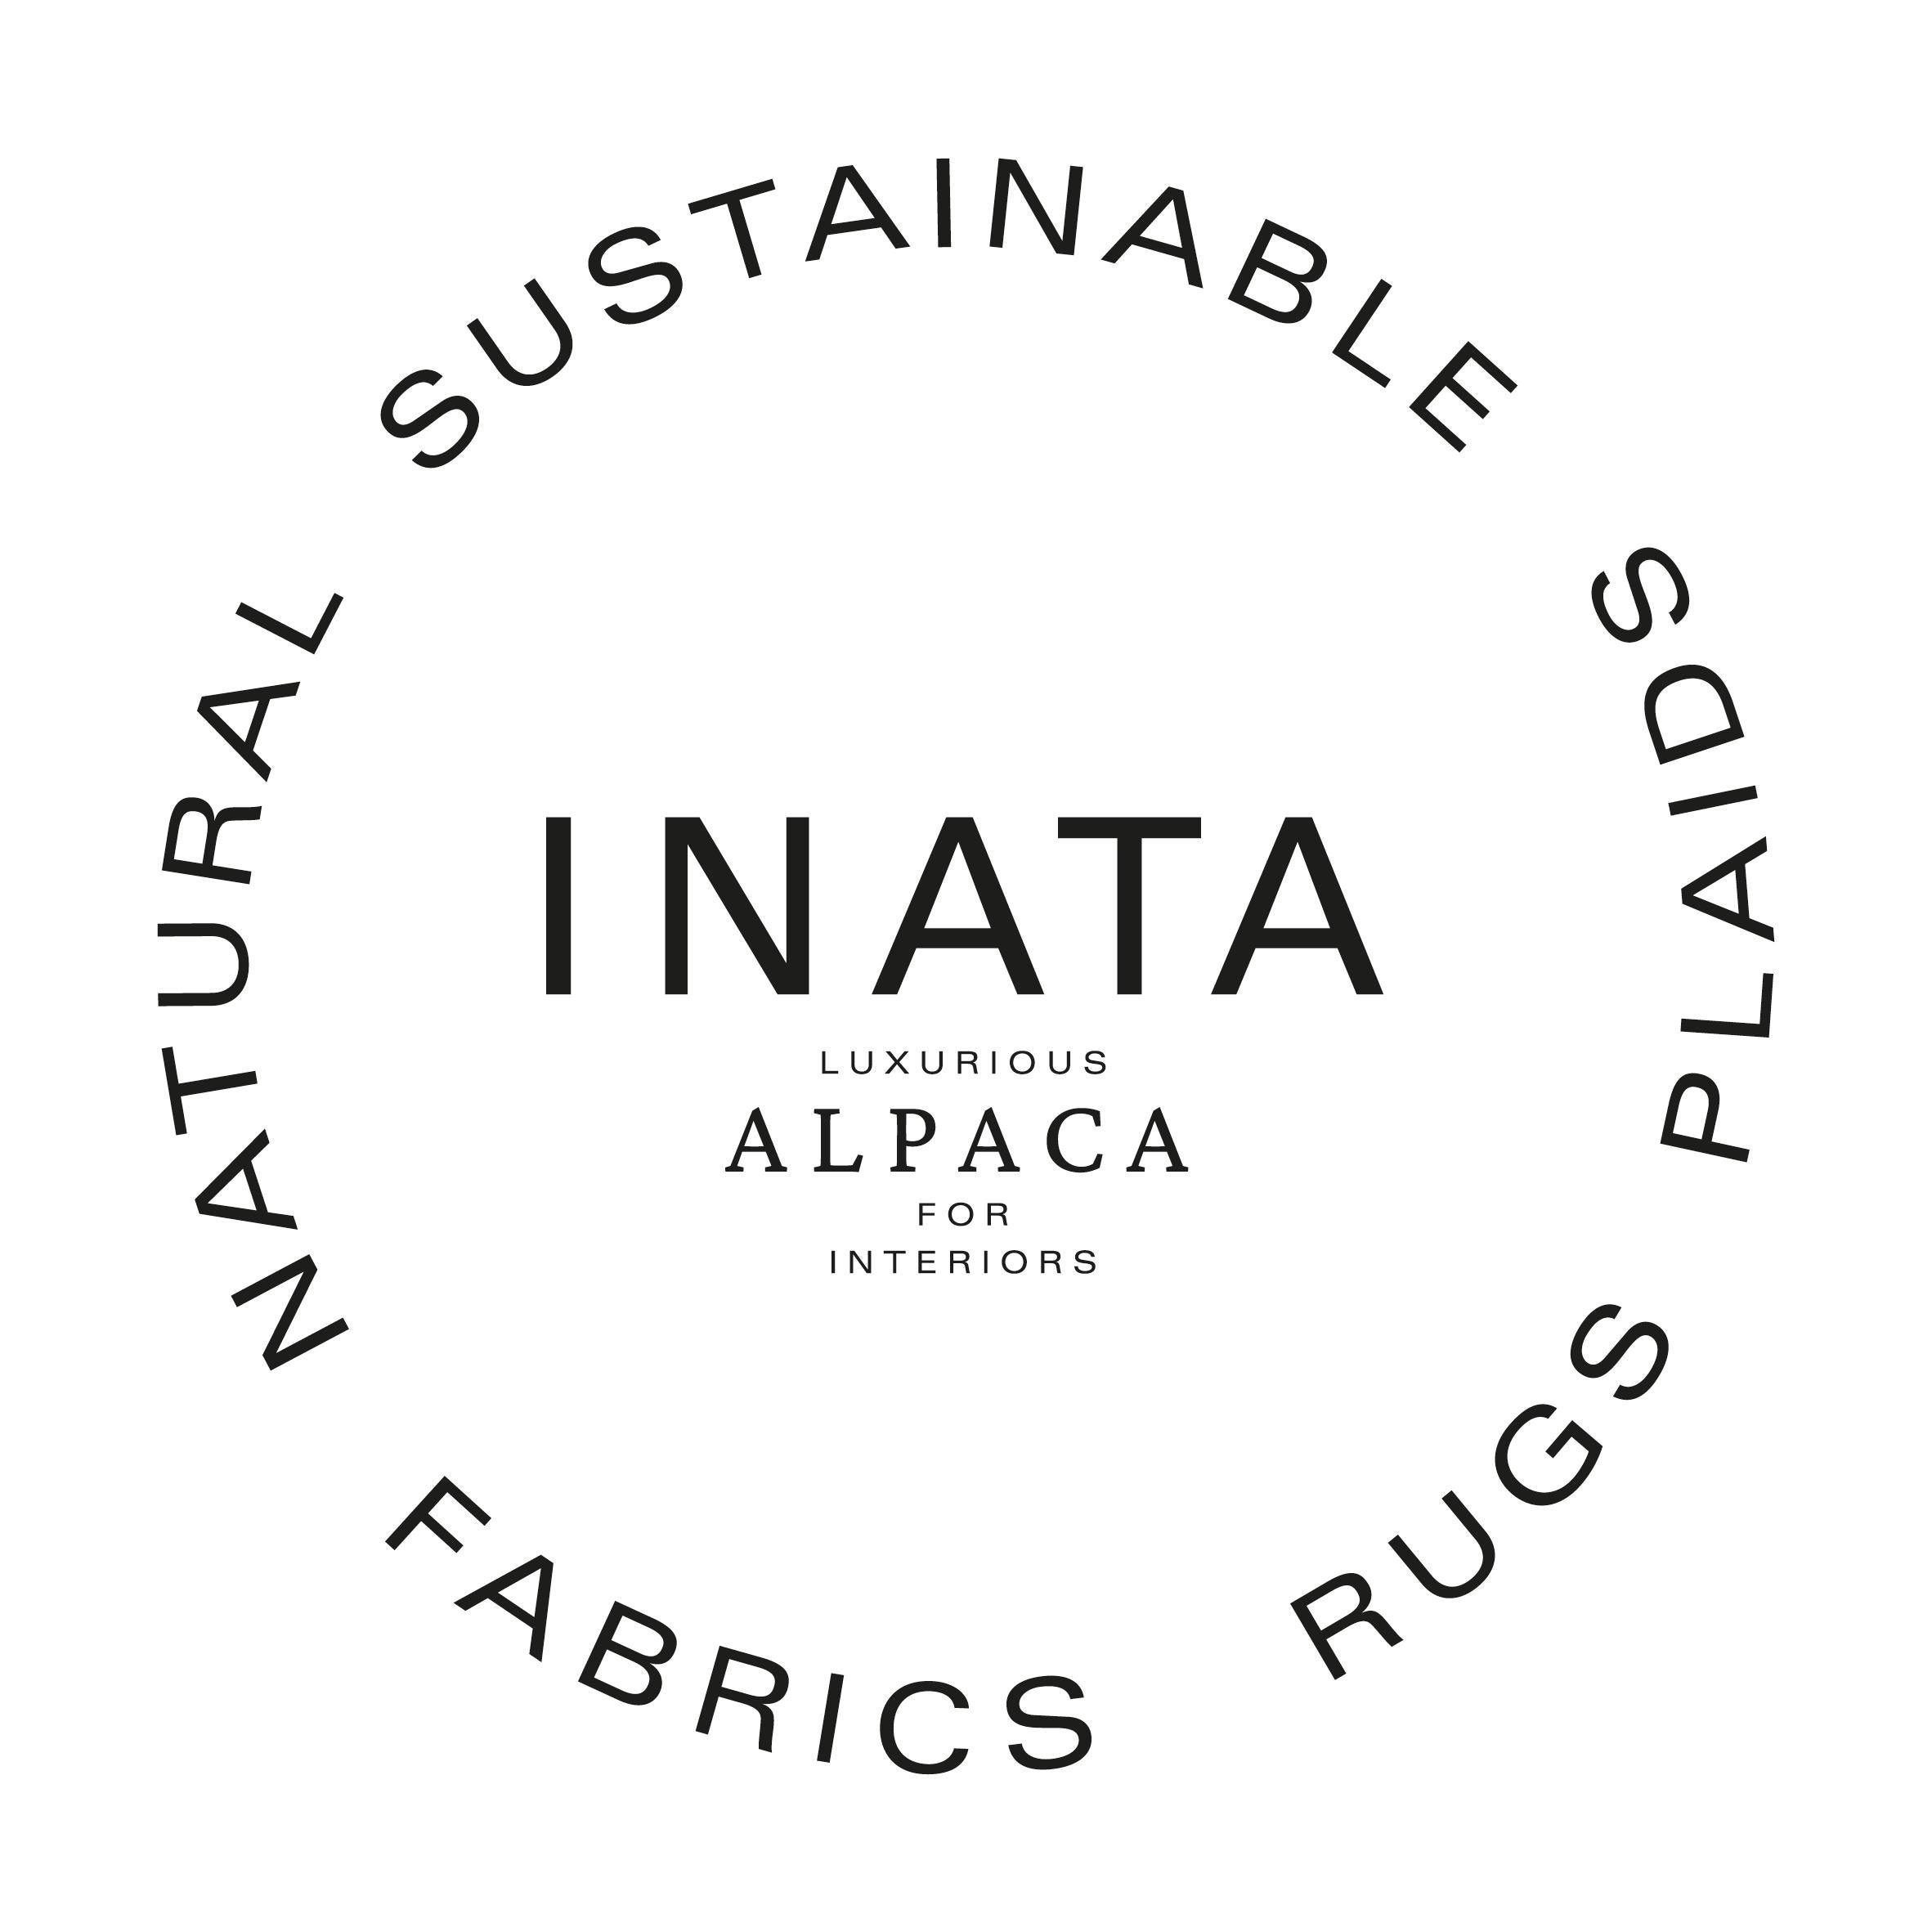 Pushing the boundaries of sustainable luxury textiles for interiors, we preserve theh heritage of and empower alpaca farmers. Every step of the production is controlled by Inata to guarantee products are made with the greatest respect to the people